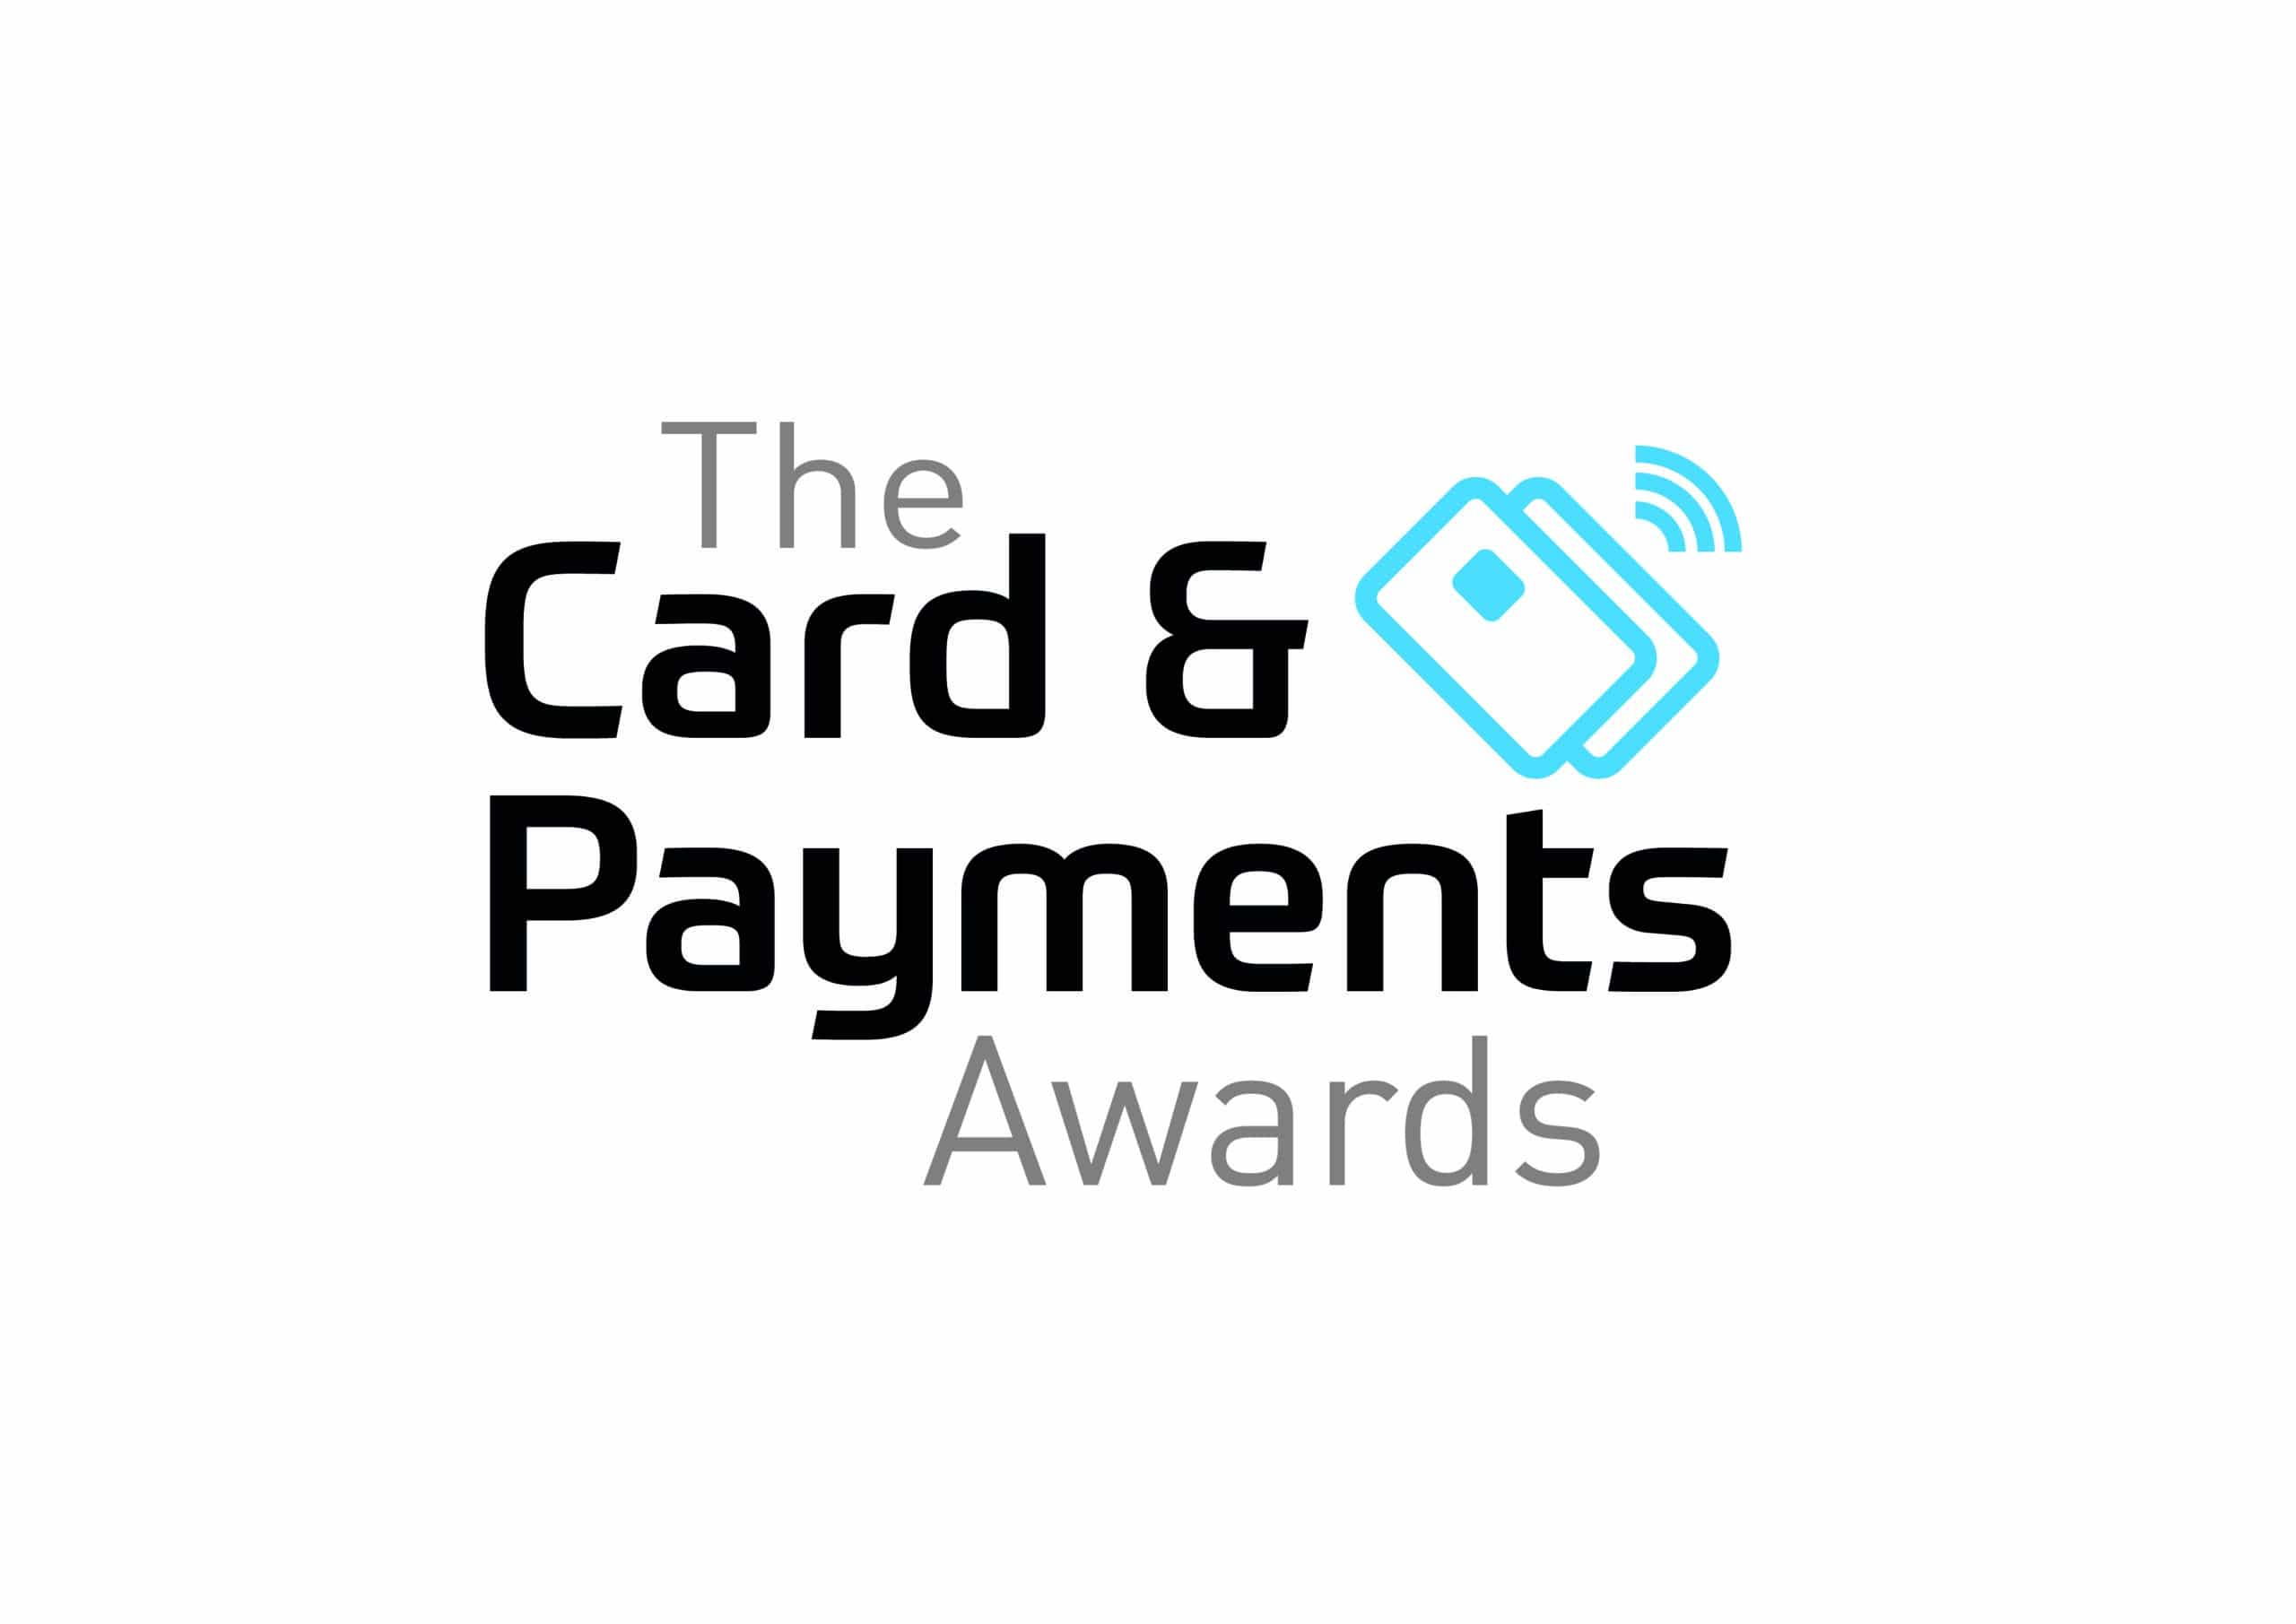 The Cards and Payment Awards